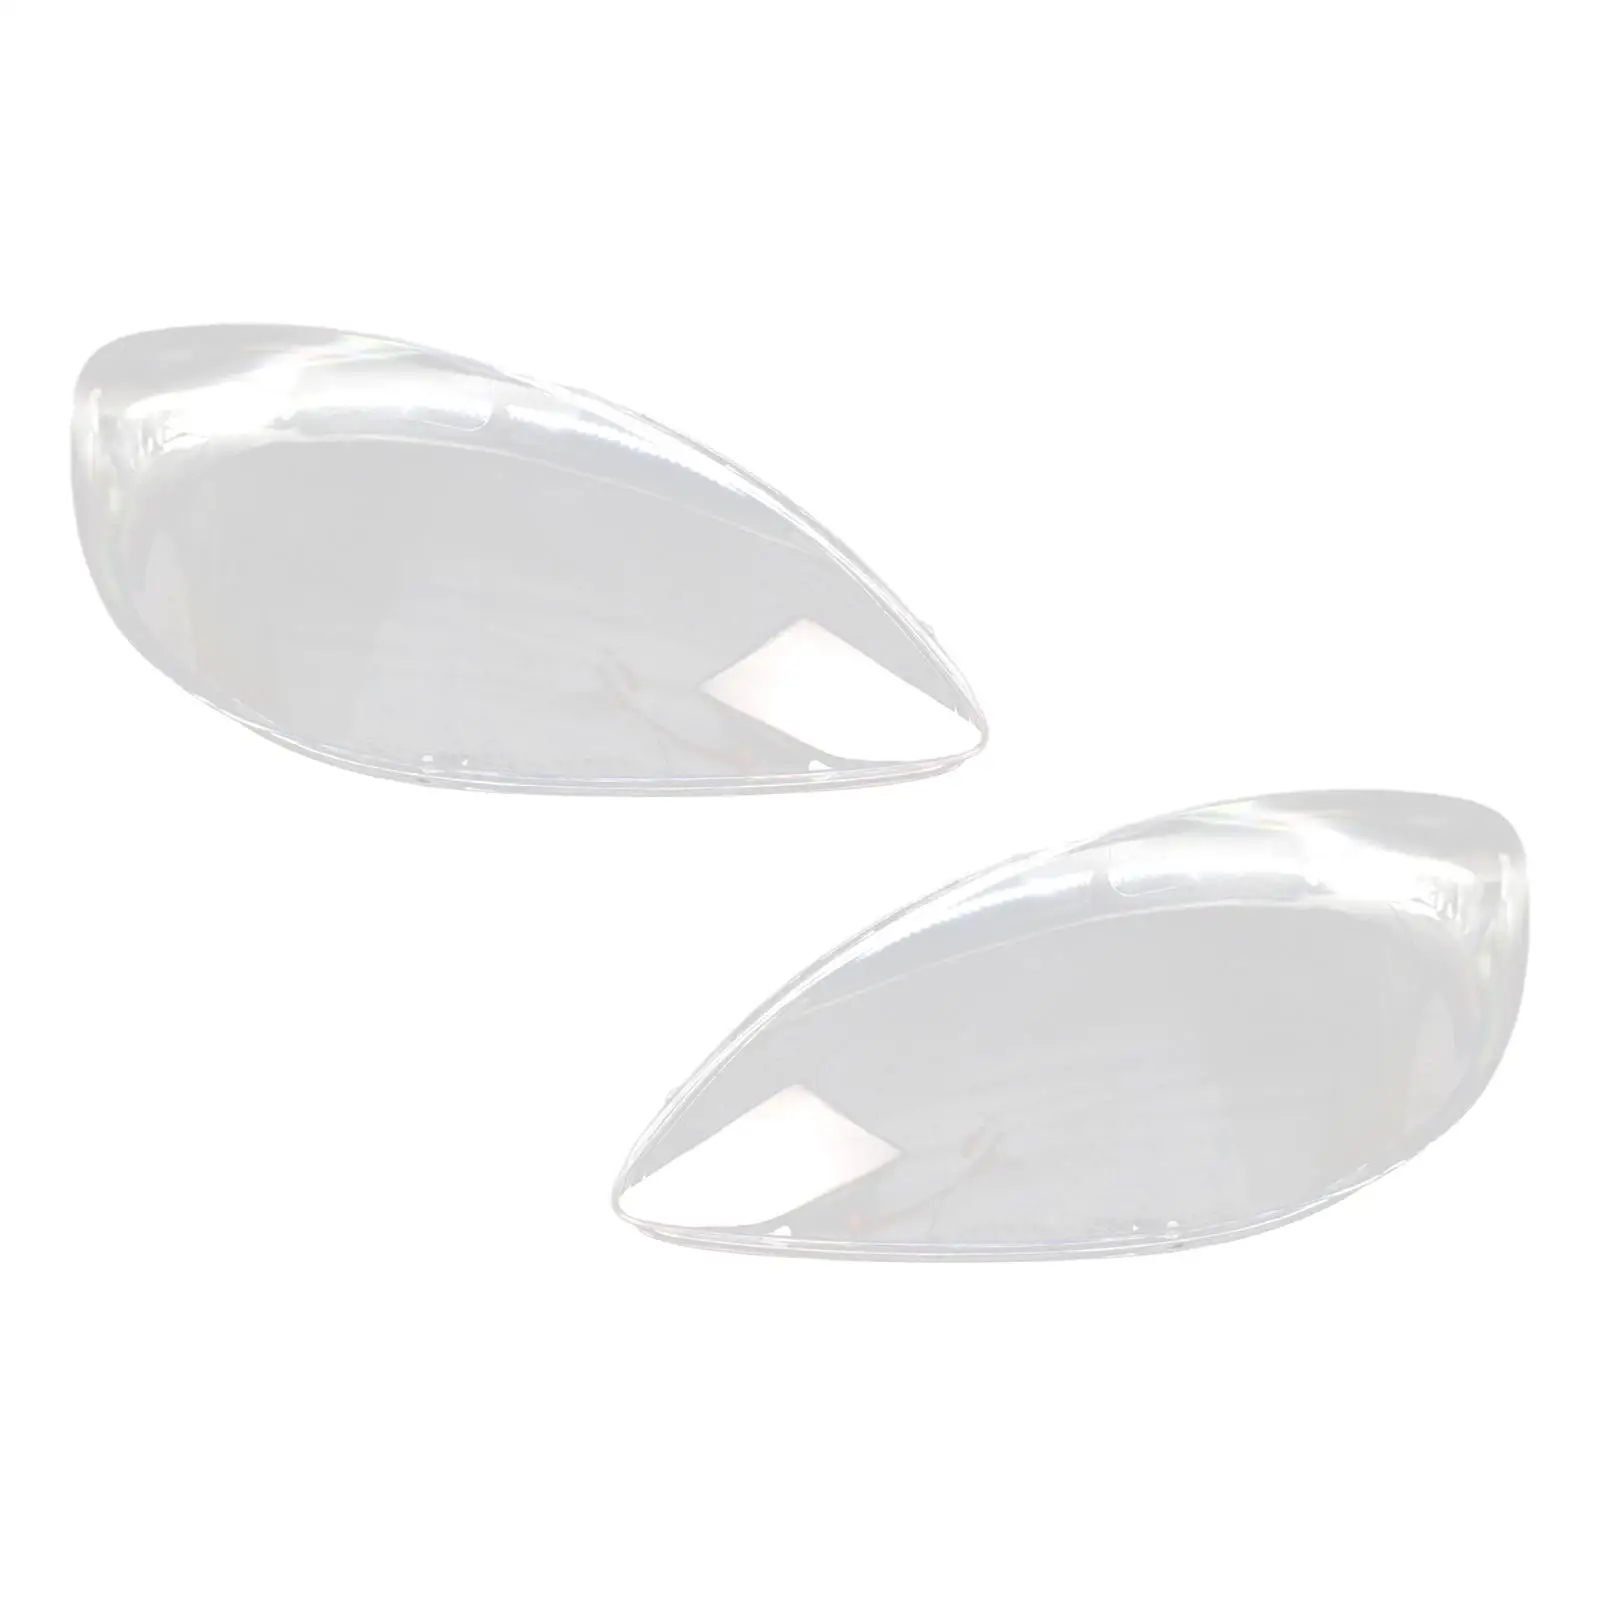 2Pcs  Headlight  Cover Replacement 639   2004-2010  headlight of car from breaking, dustproof